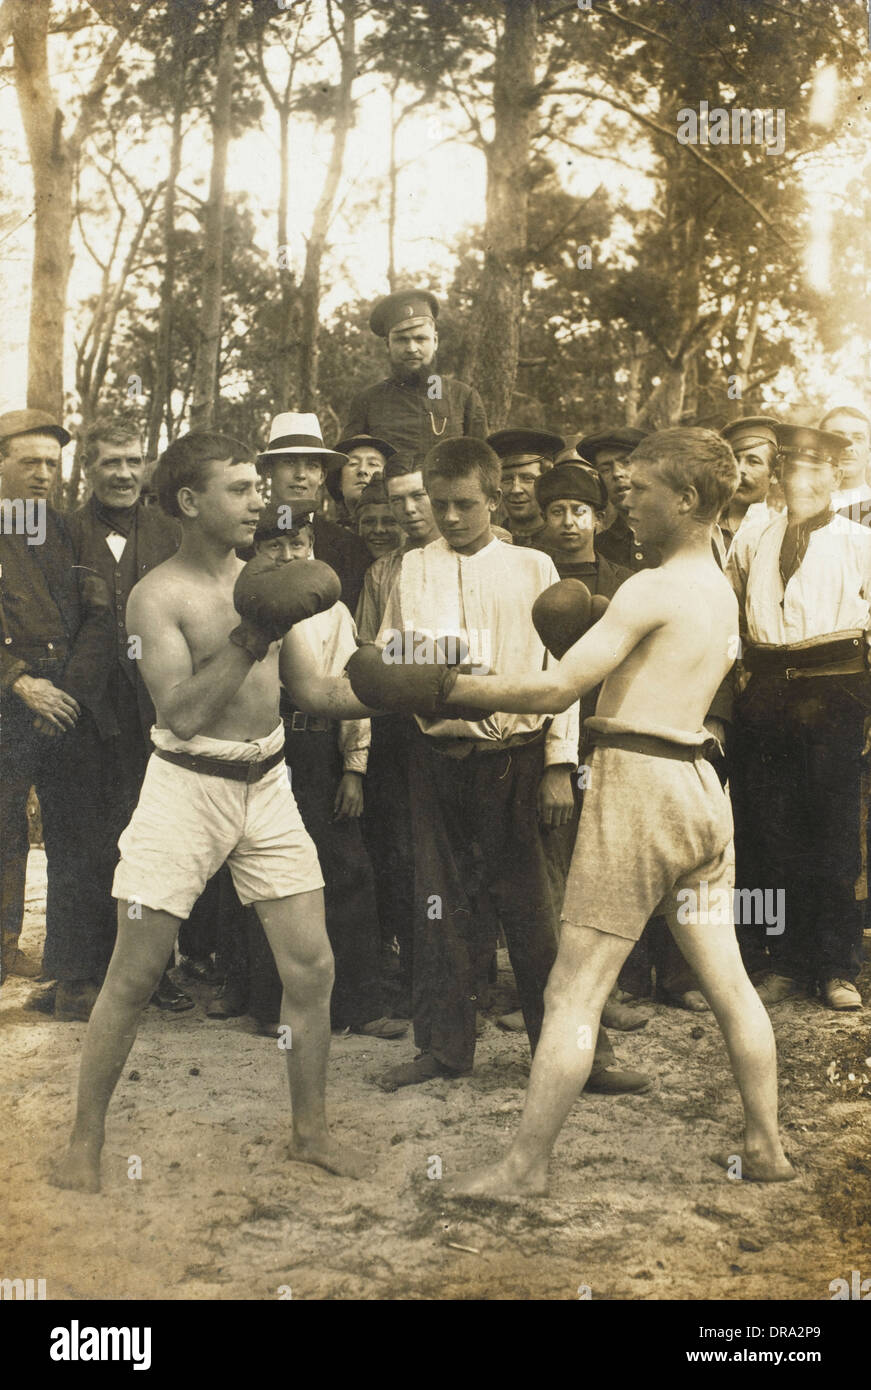 Russian Prisoners - Boxing - German Camp, WWI Stock Photo